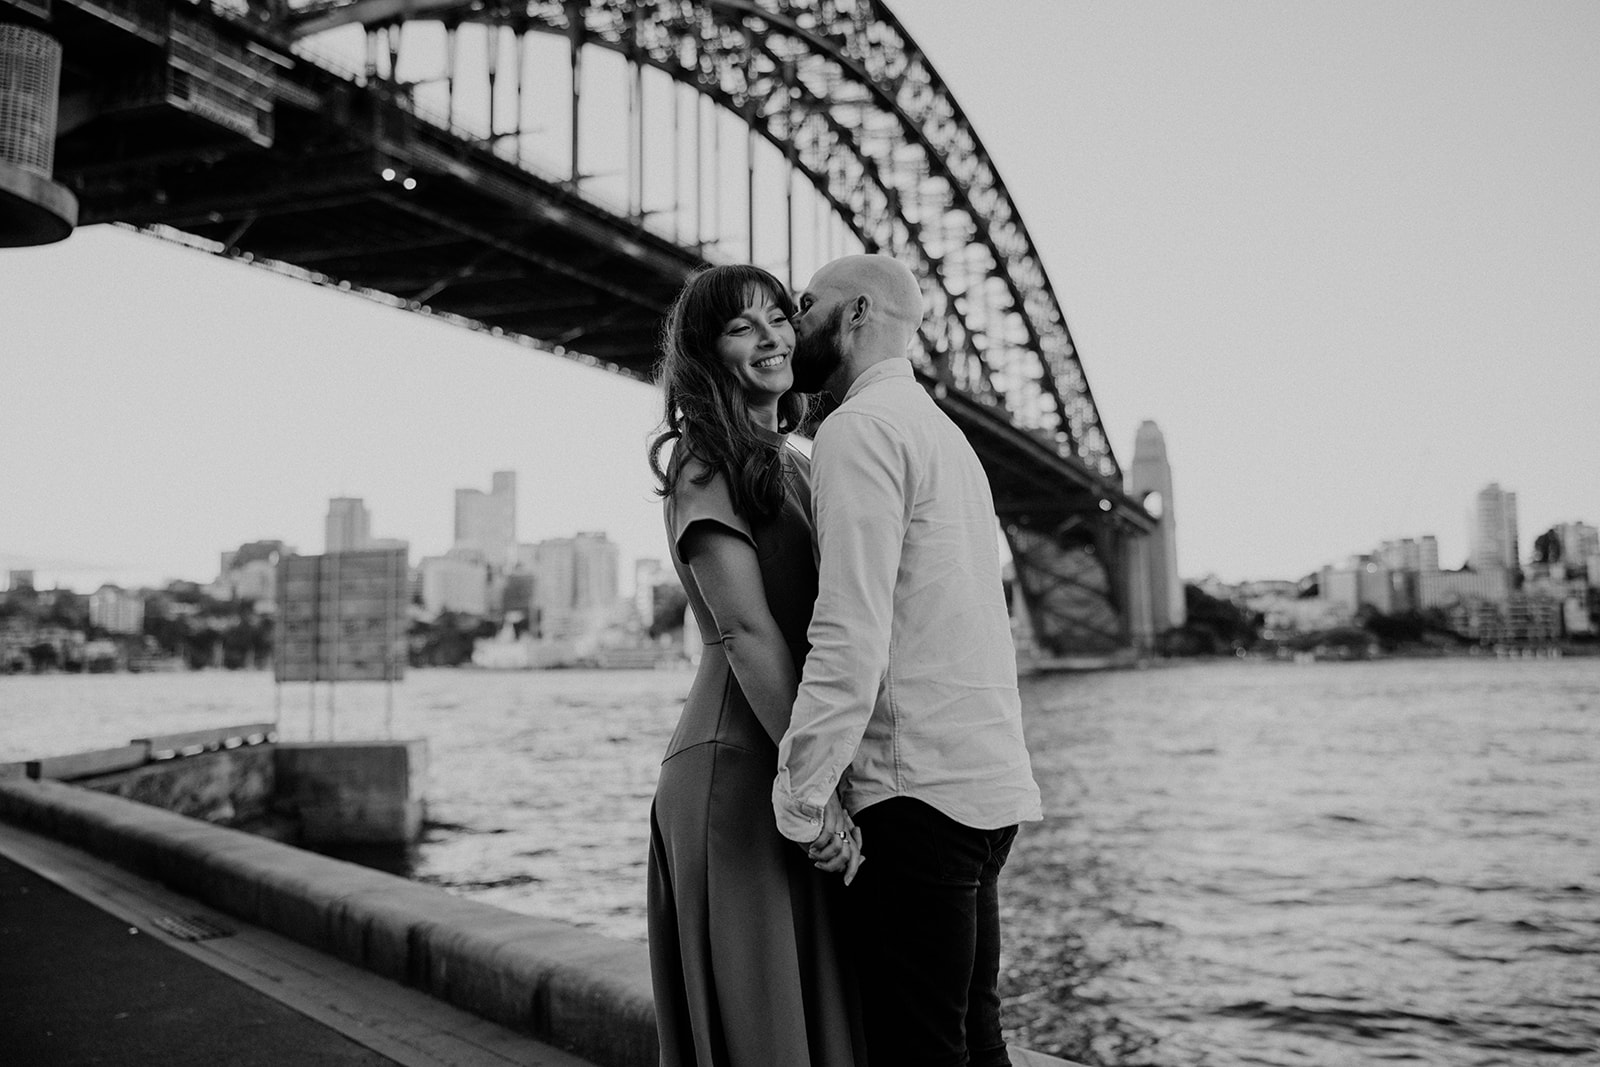 Soon to be groom quick kiss at their engagement shoot in Sydney CBD